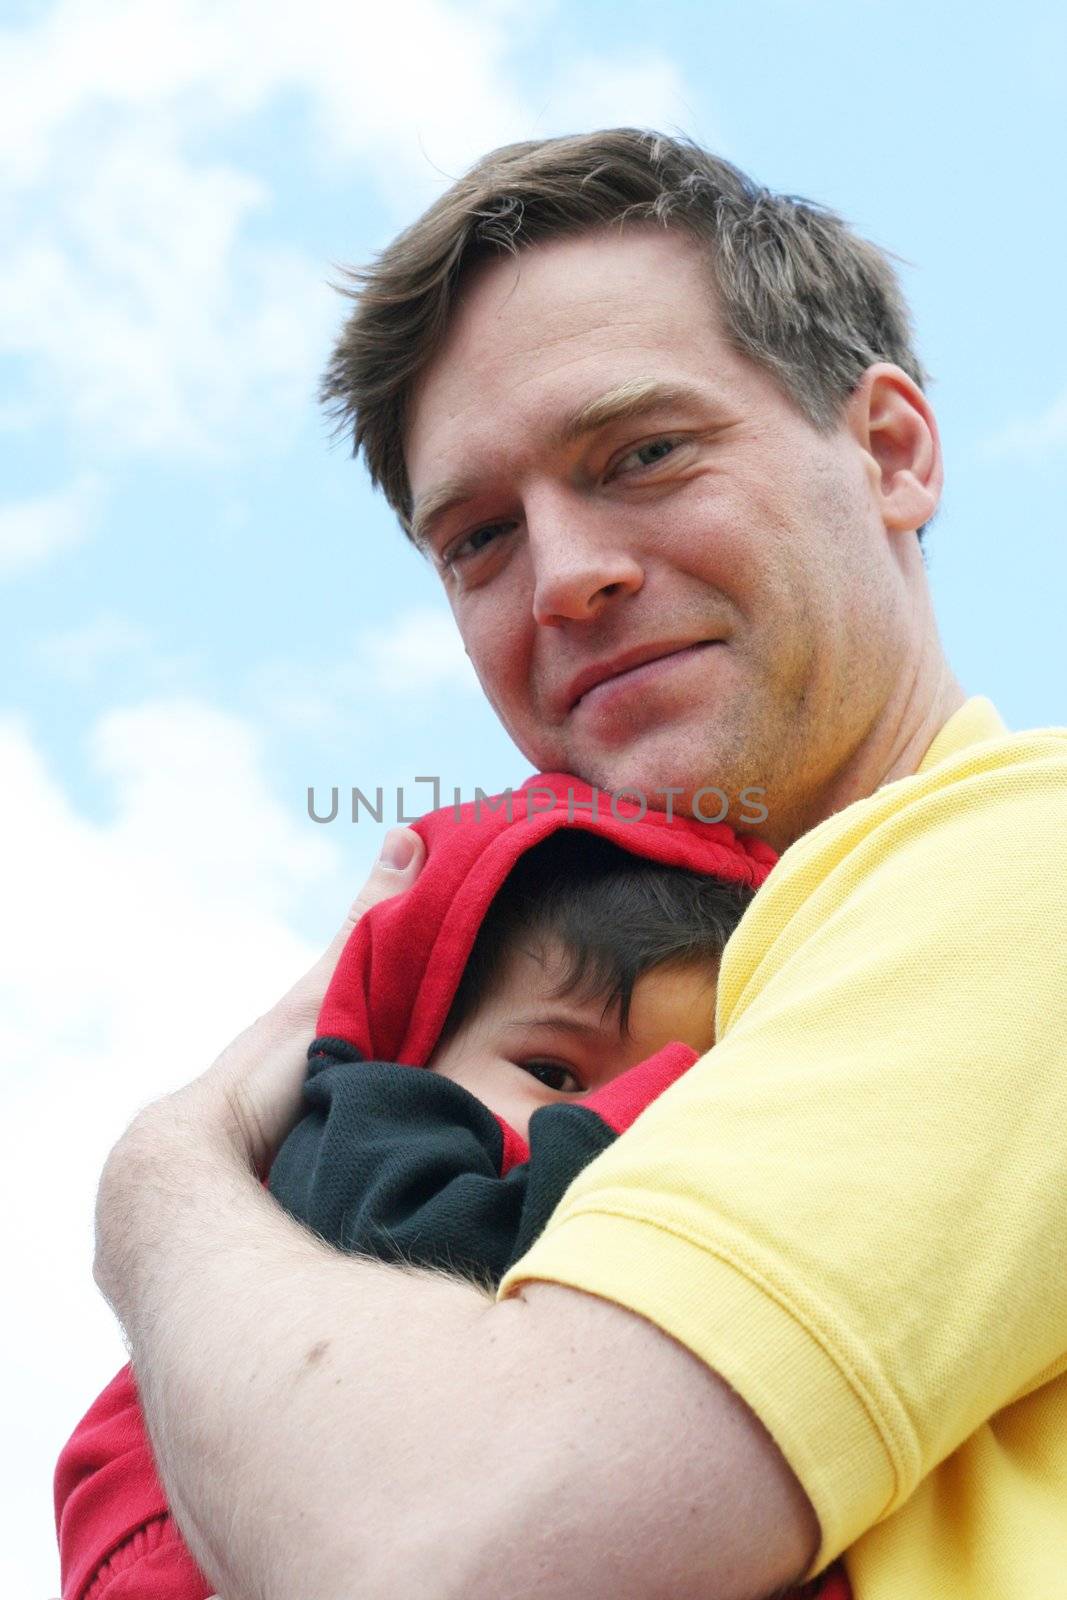 Baby cuddled safely in dad's arms. Father is Scandinavian, baby is multiracial